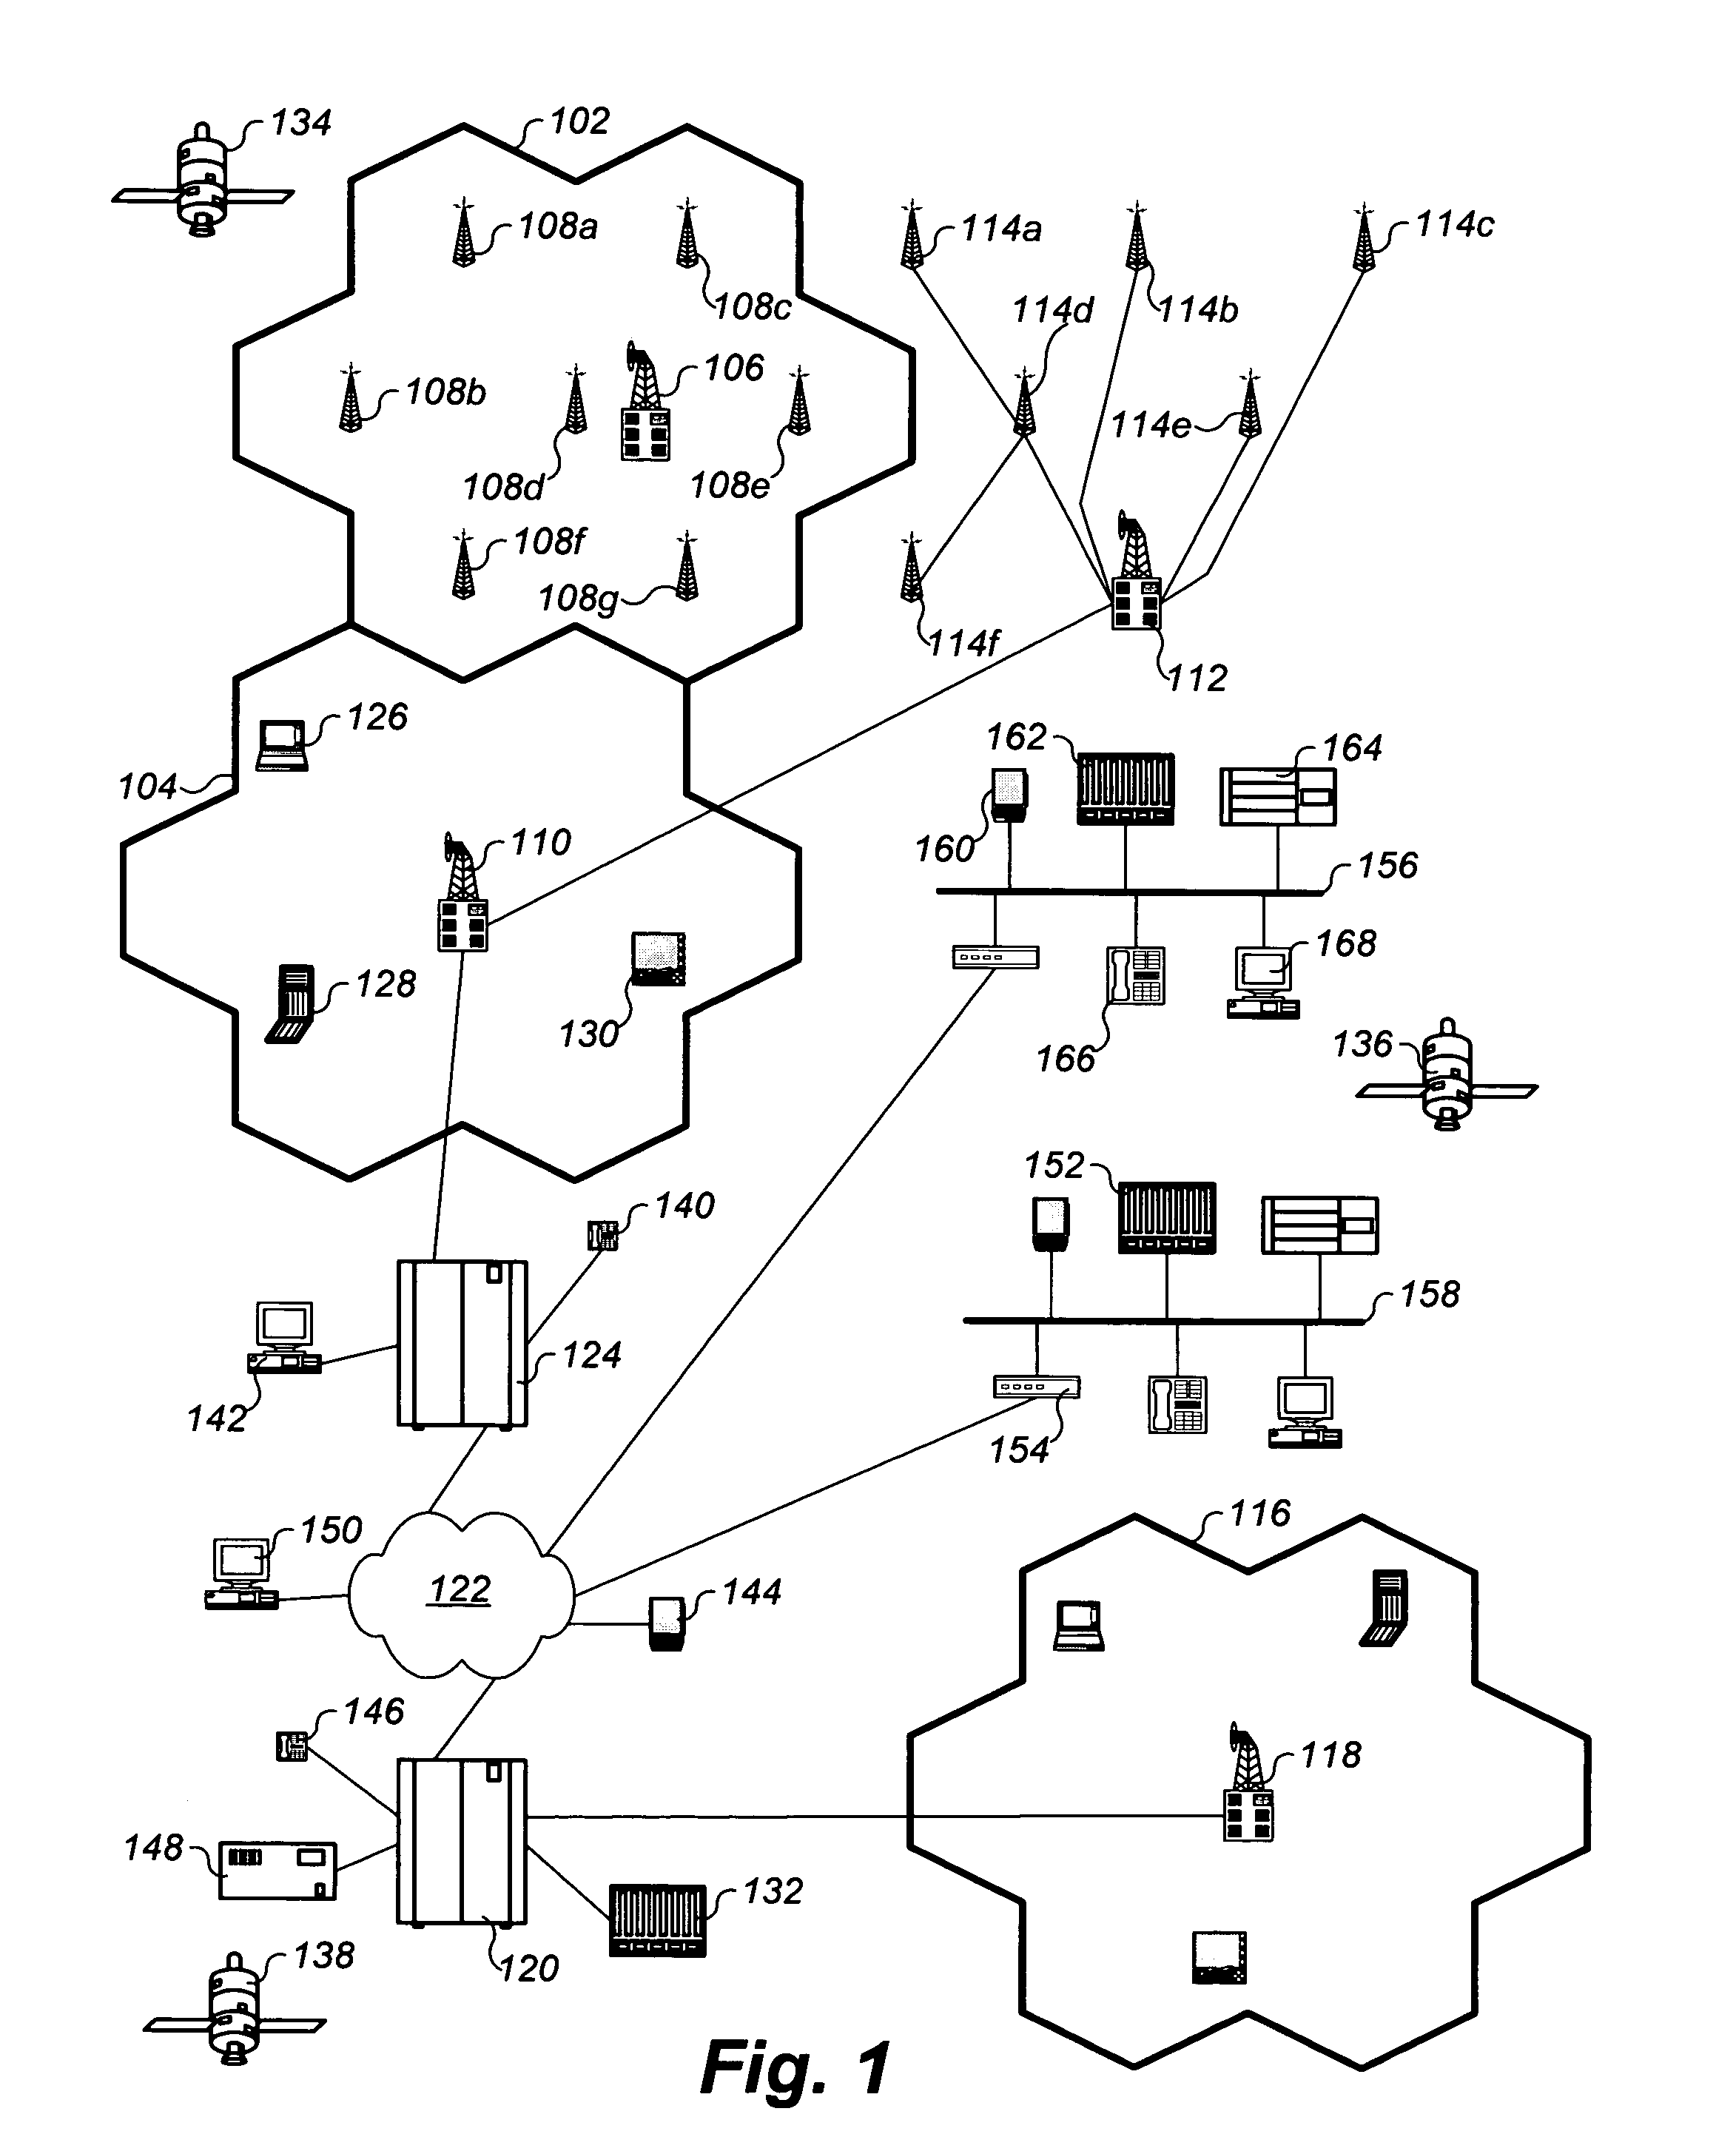 System and method for anonymous location based services